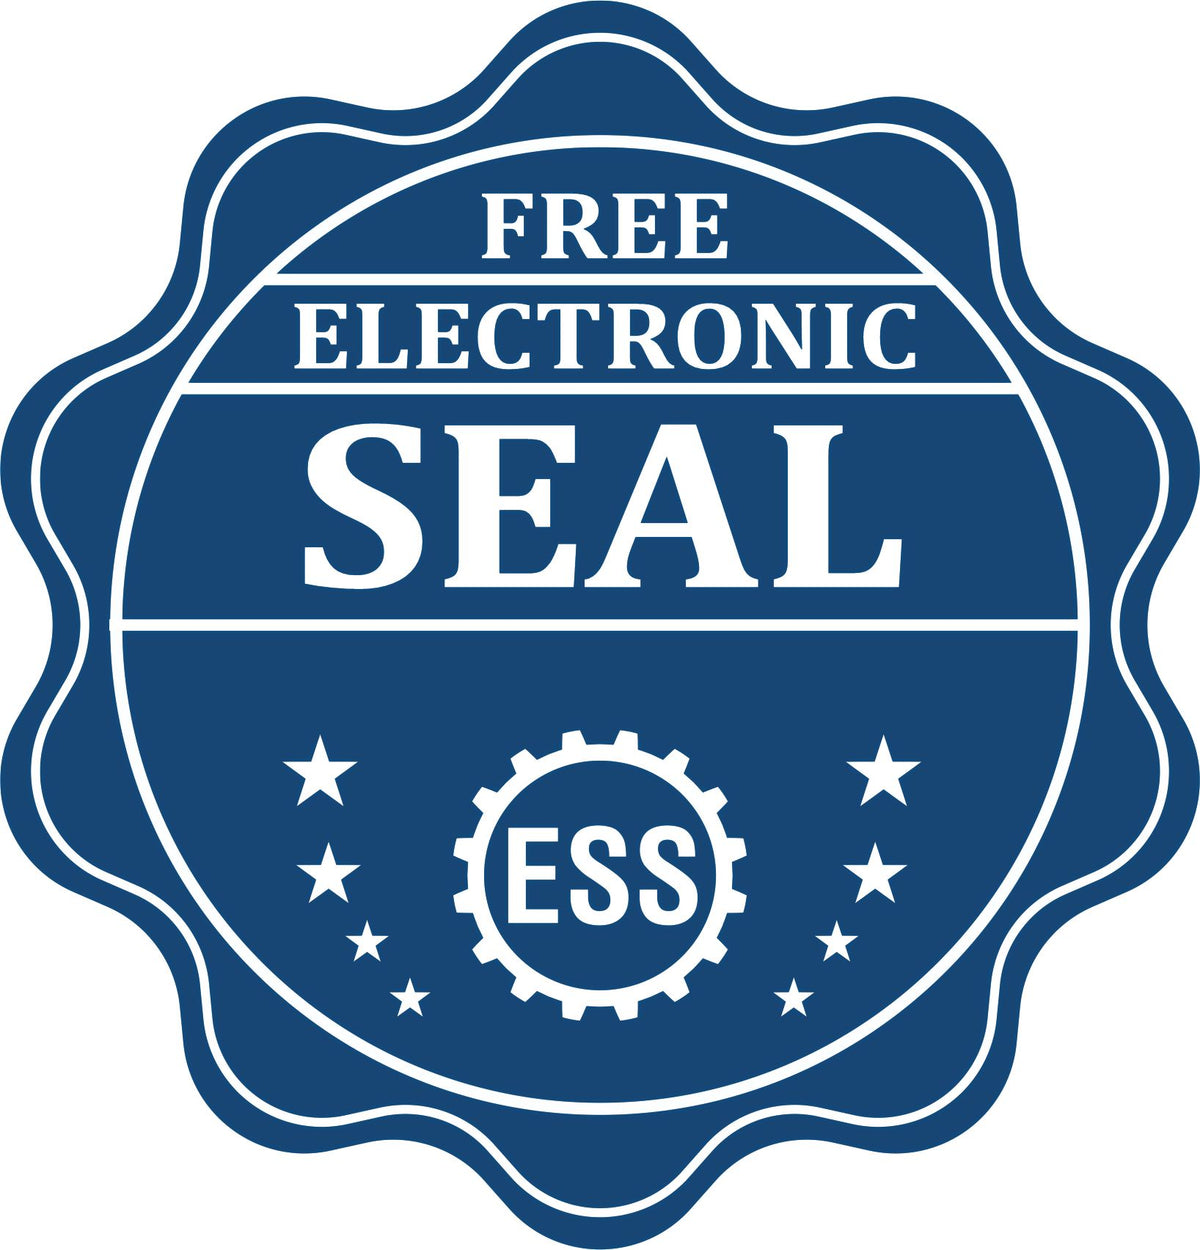 A badge showing a free electronic seal for the Hybrid Idaho Geologist Seal with stars and the ESS gear on the emblem.